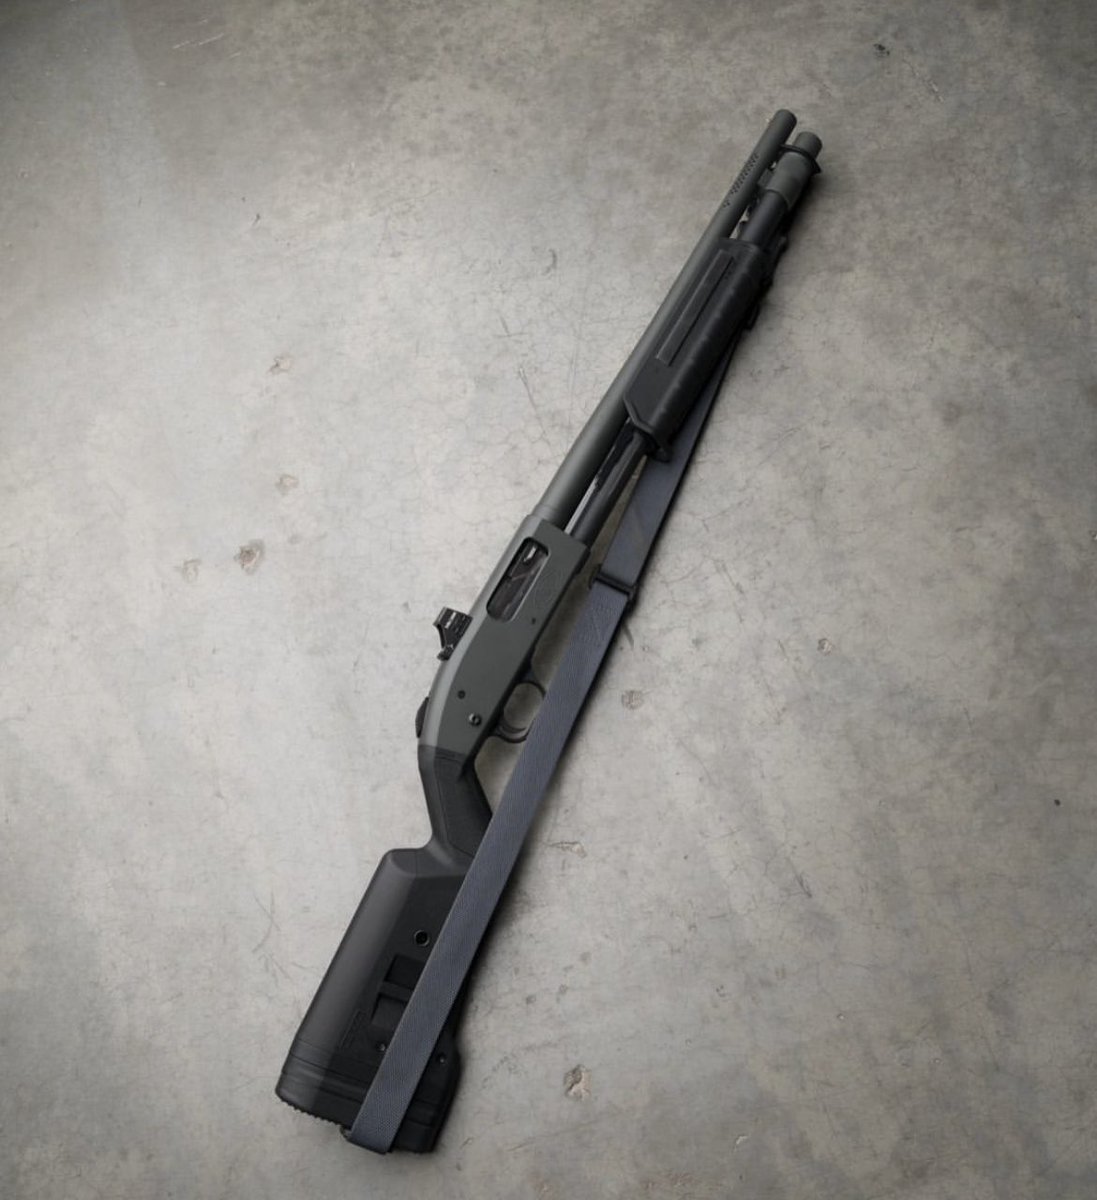 Smooth operator. 
How’s this setup for a home defense shotgun? #Mossberg #Mossberg590 #Mossberg #HomeDefense